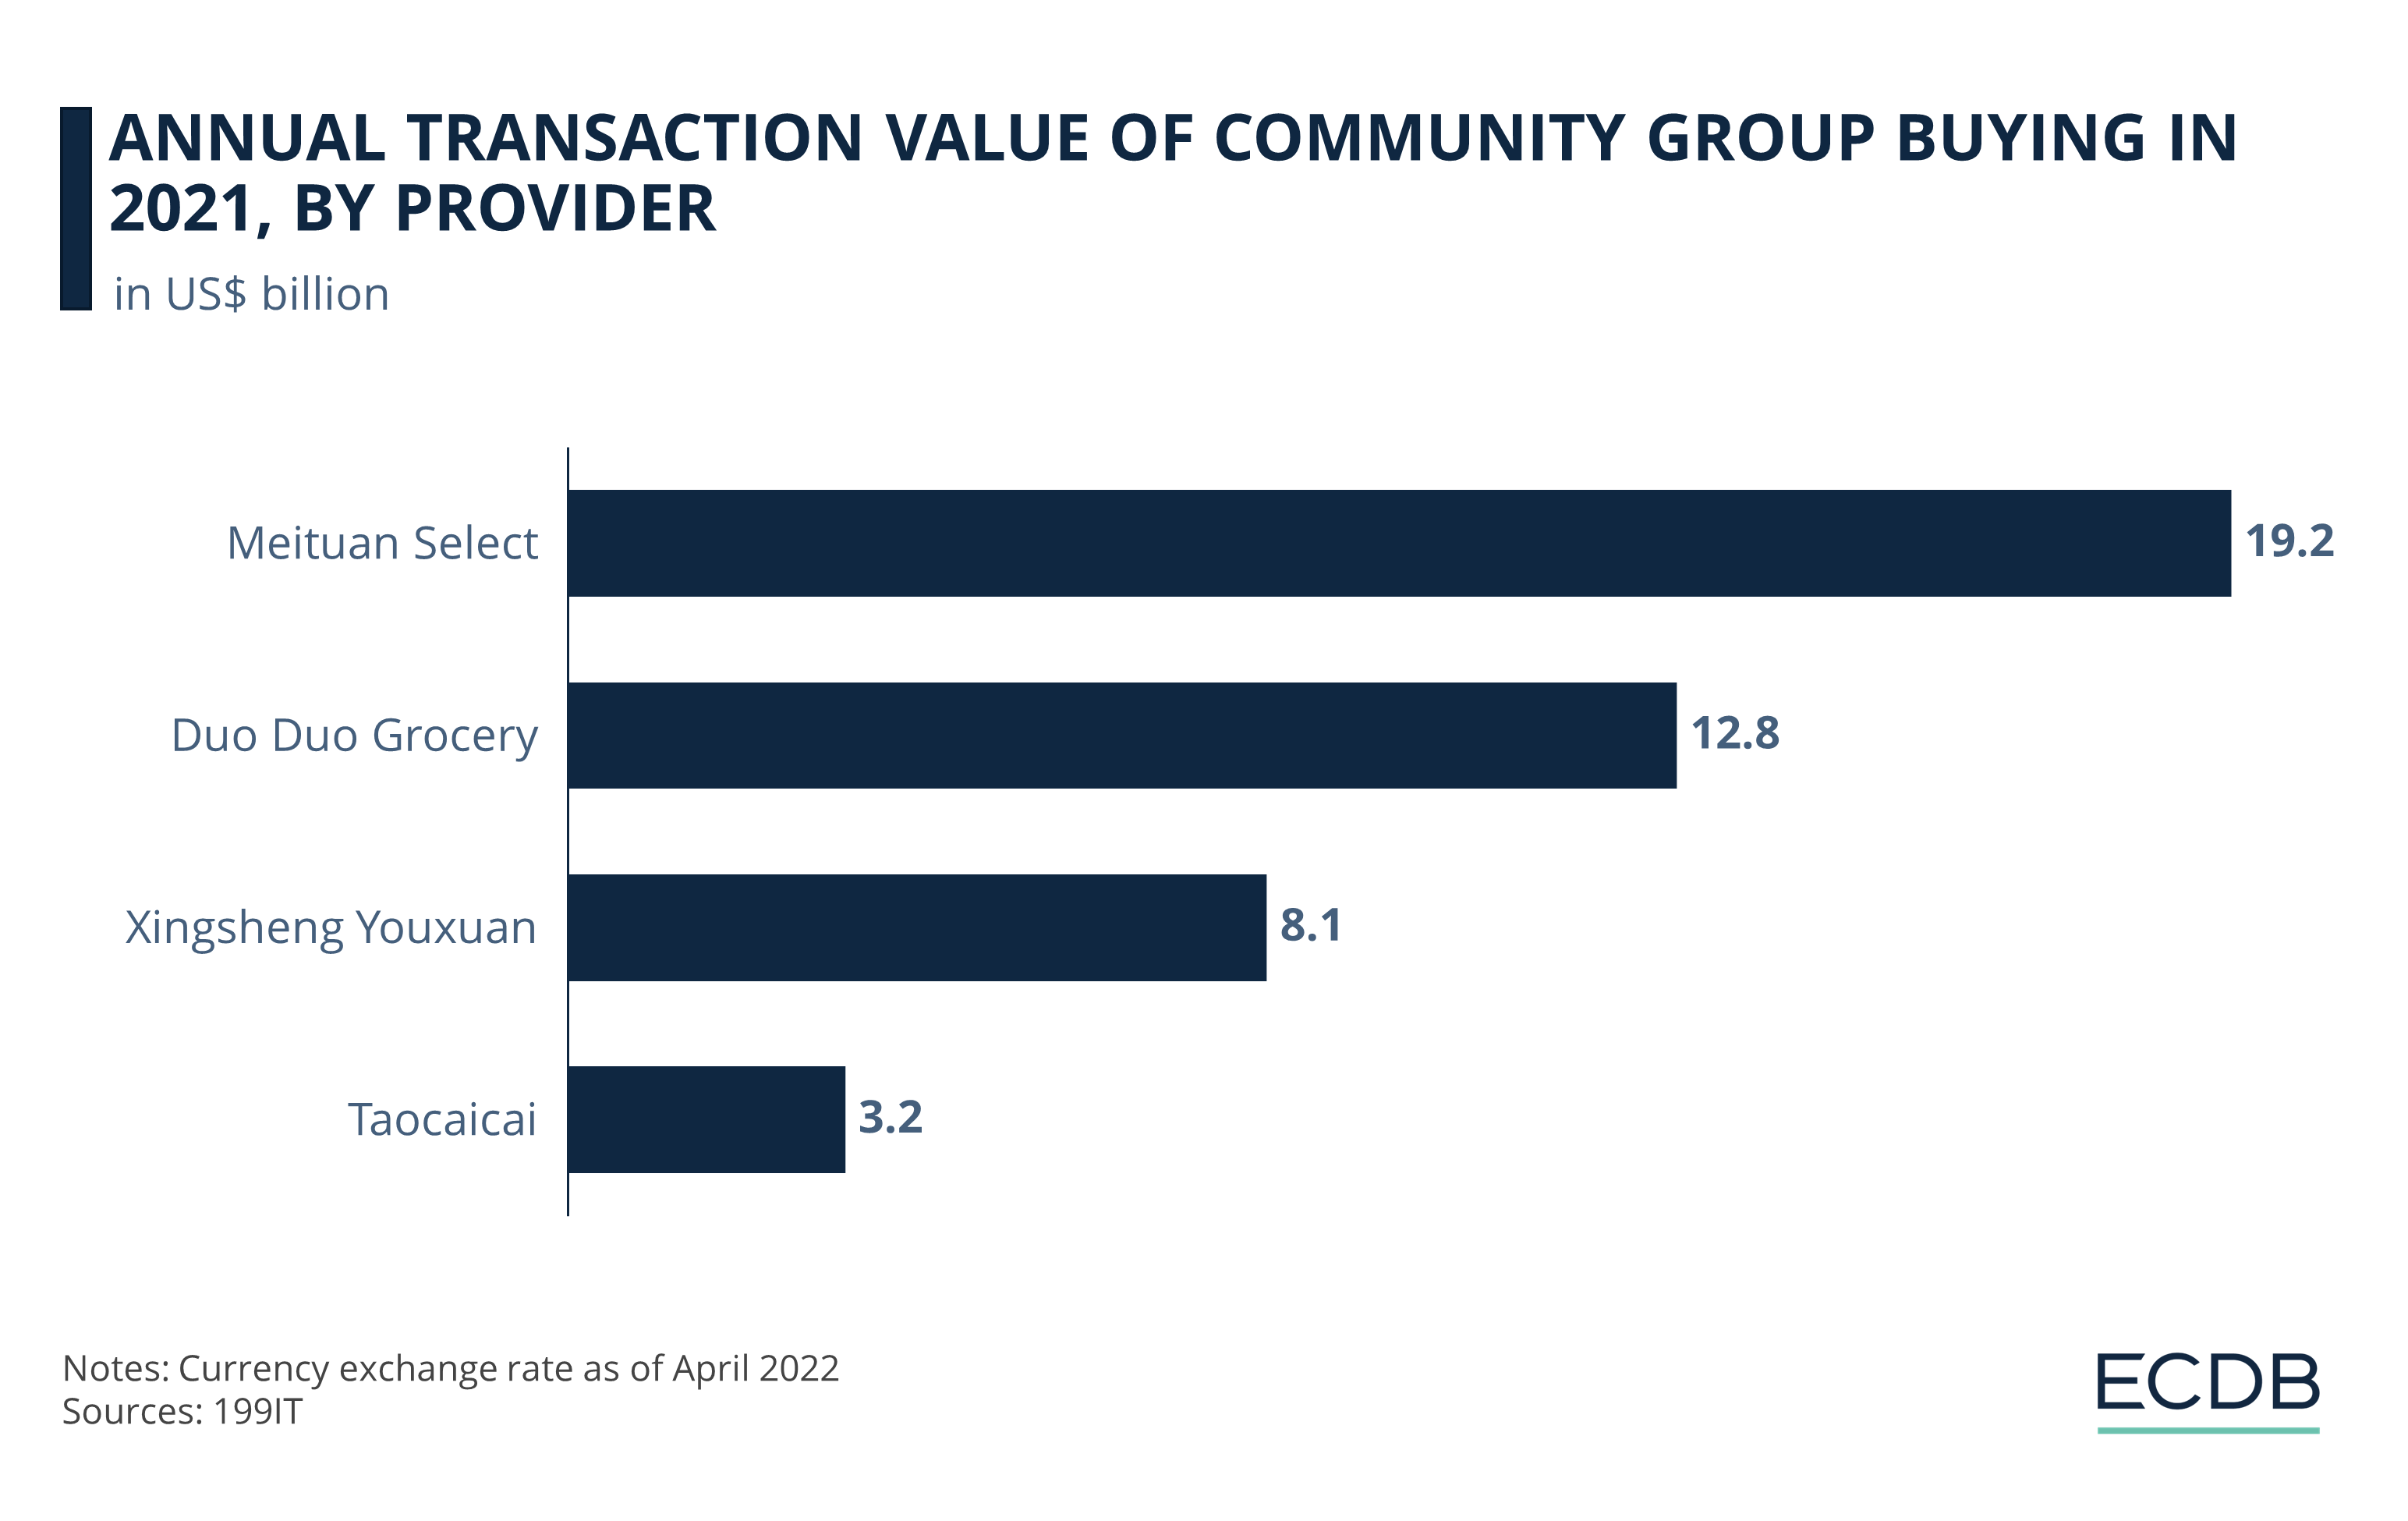 Annual Transaction Value of Community Group Buying in 2021, by Provider